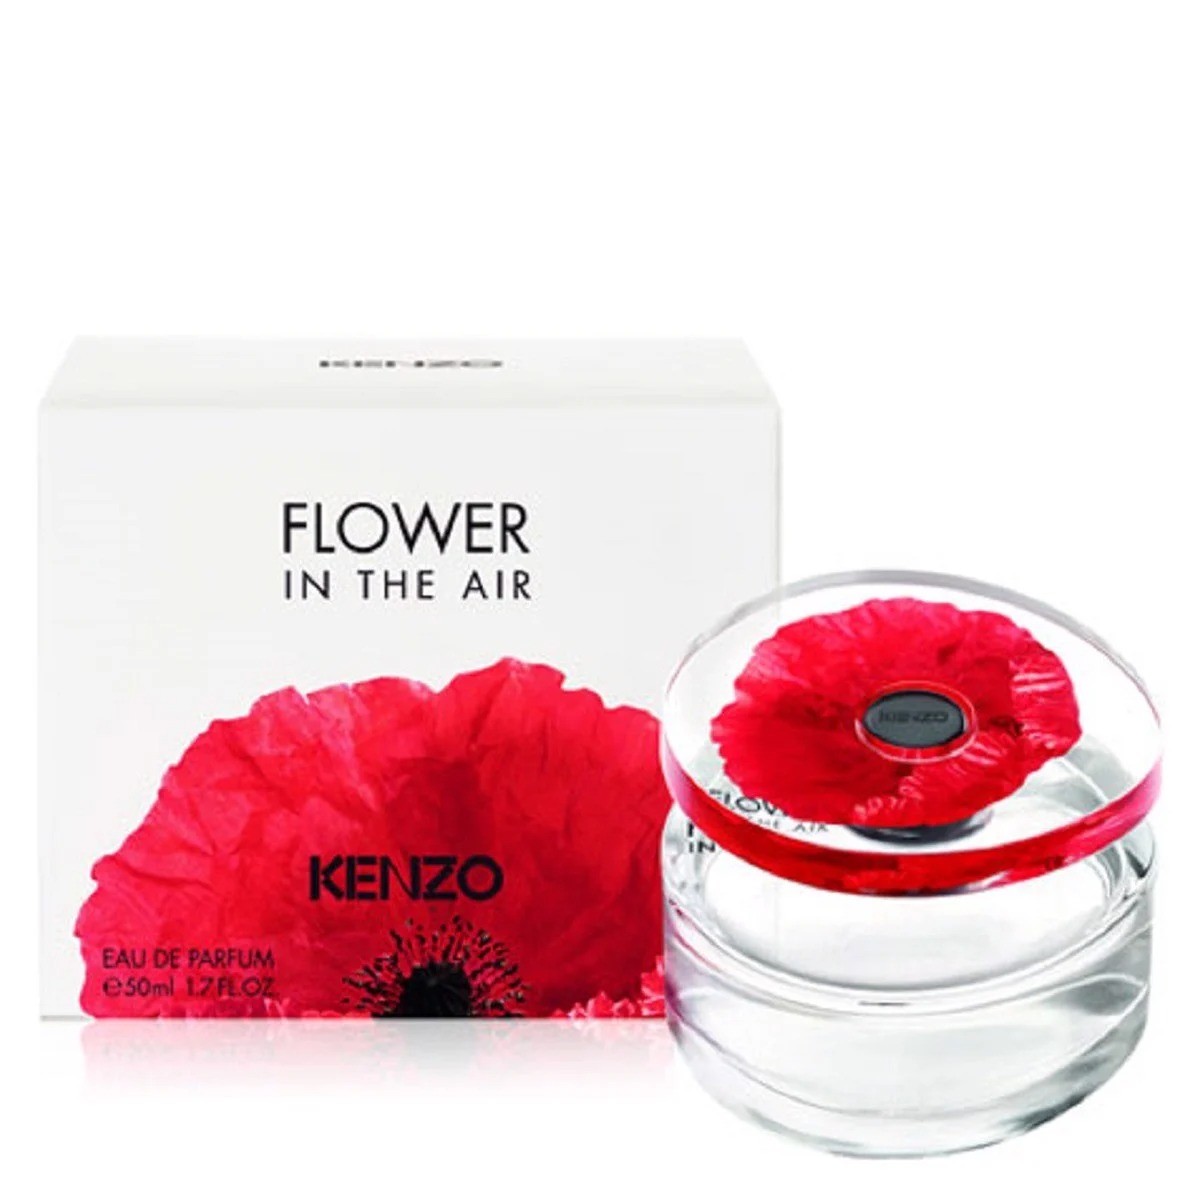 Kenzo Flower in the Air 1